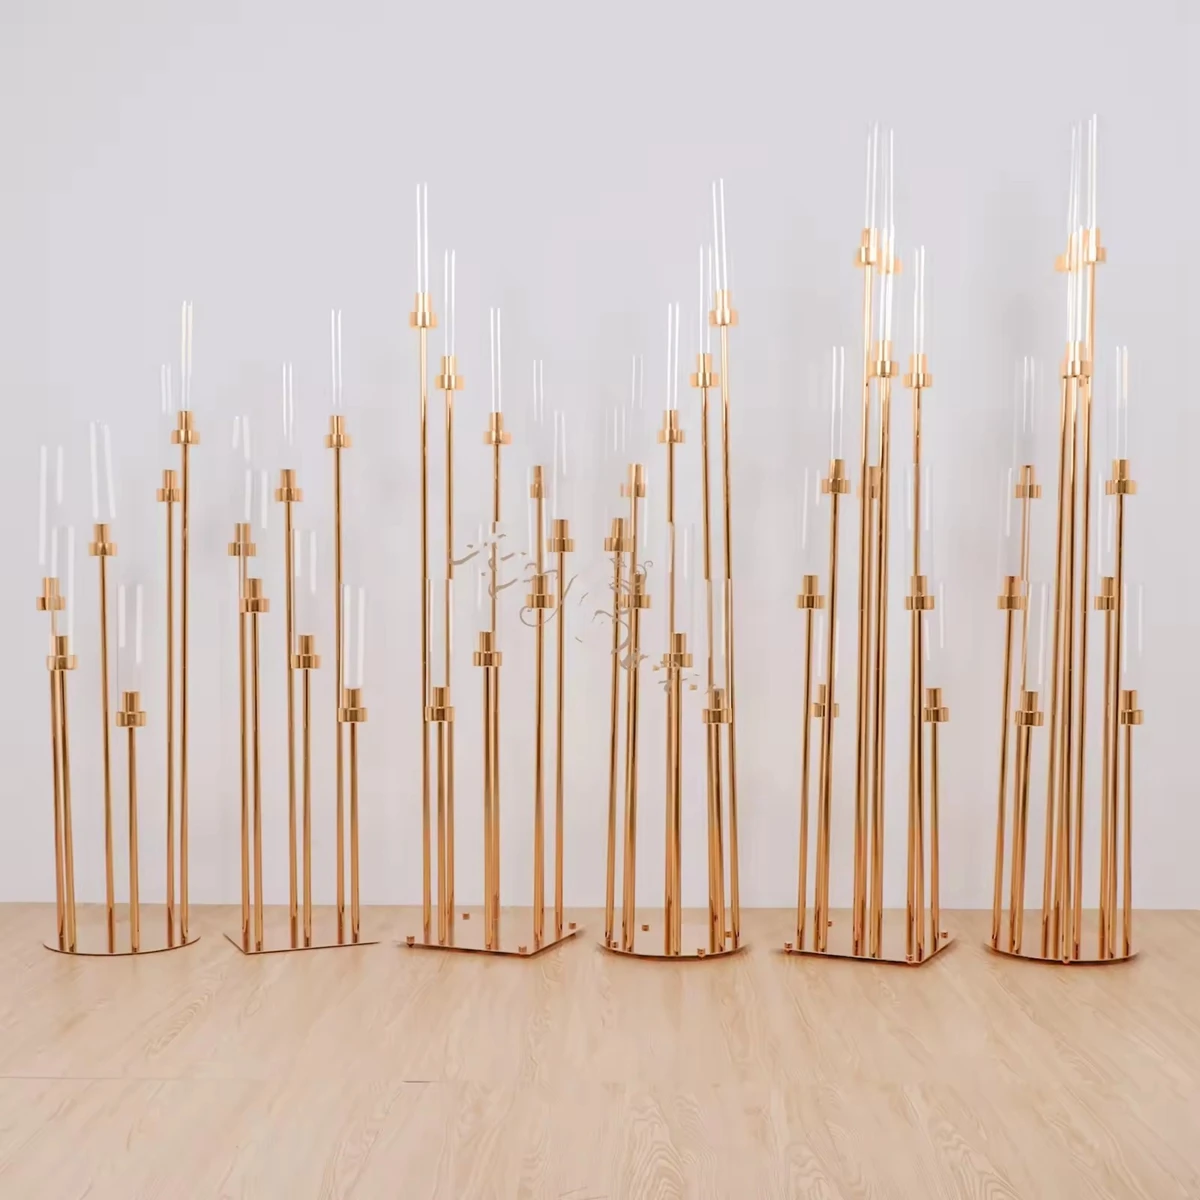 

Tall Centerpieces Wedding Gold Vase Cylinder Pedestal Stands Display for Tables Metal High Vases Column Geometric Flower Stand